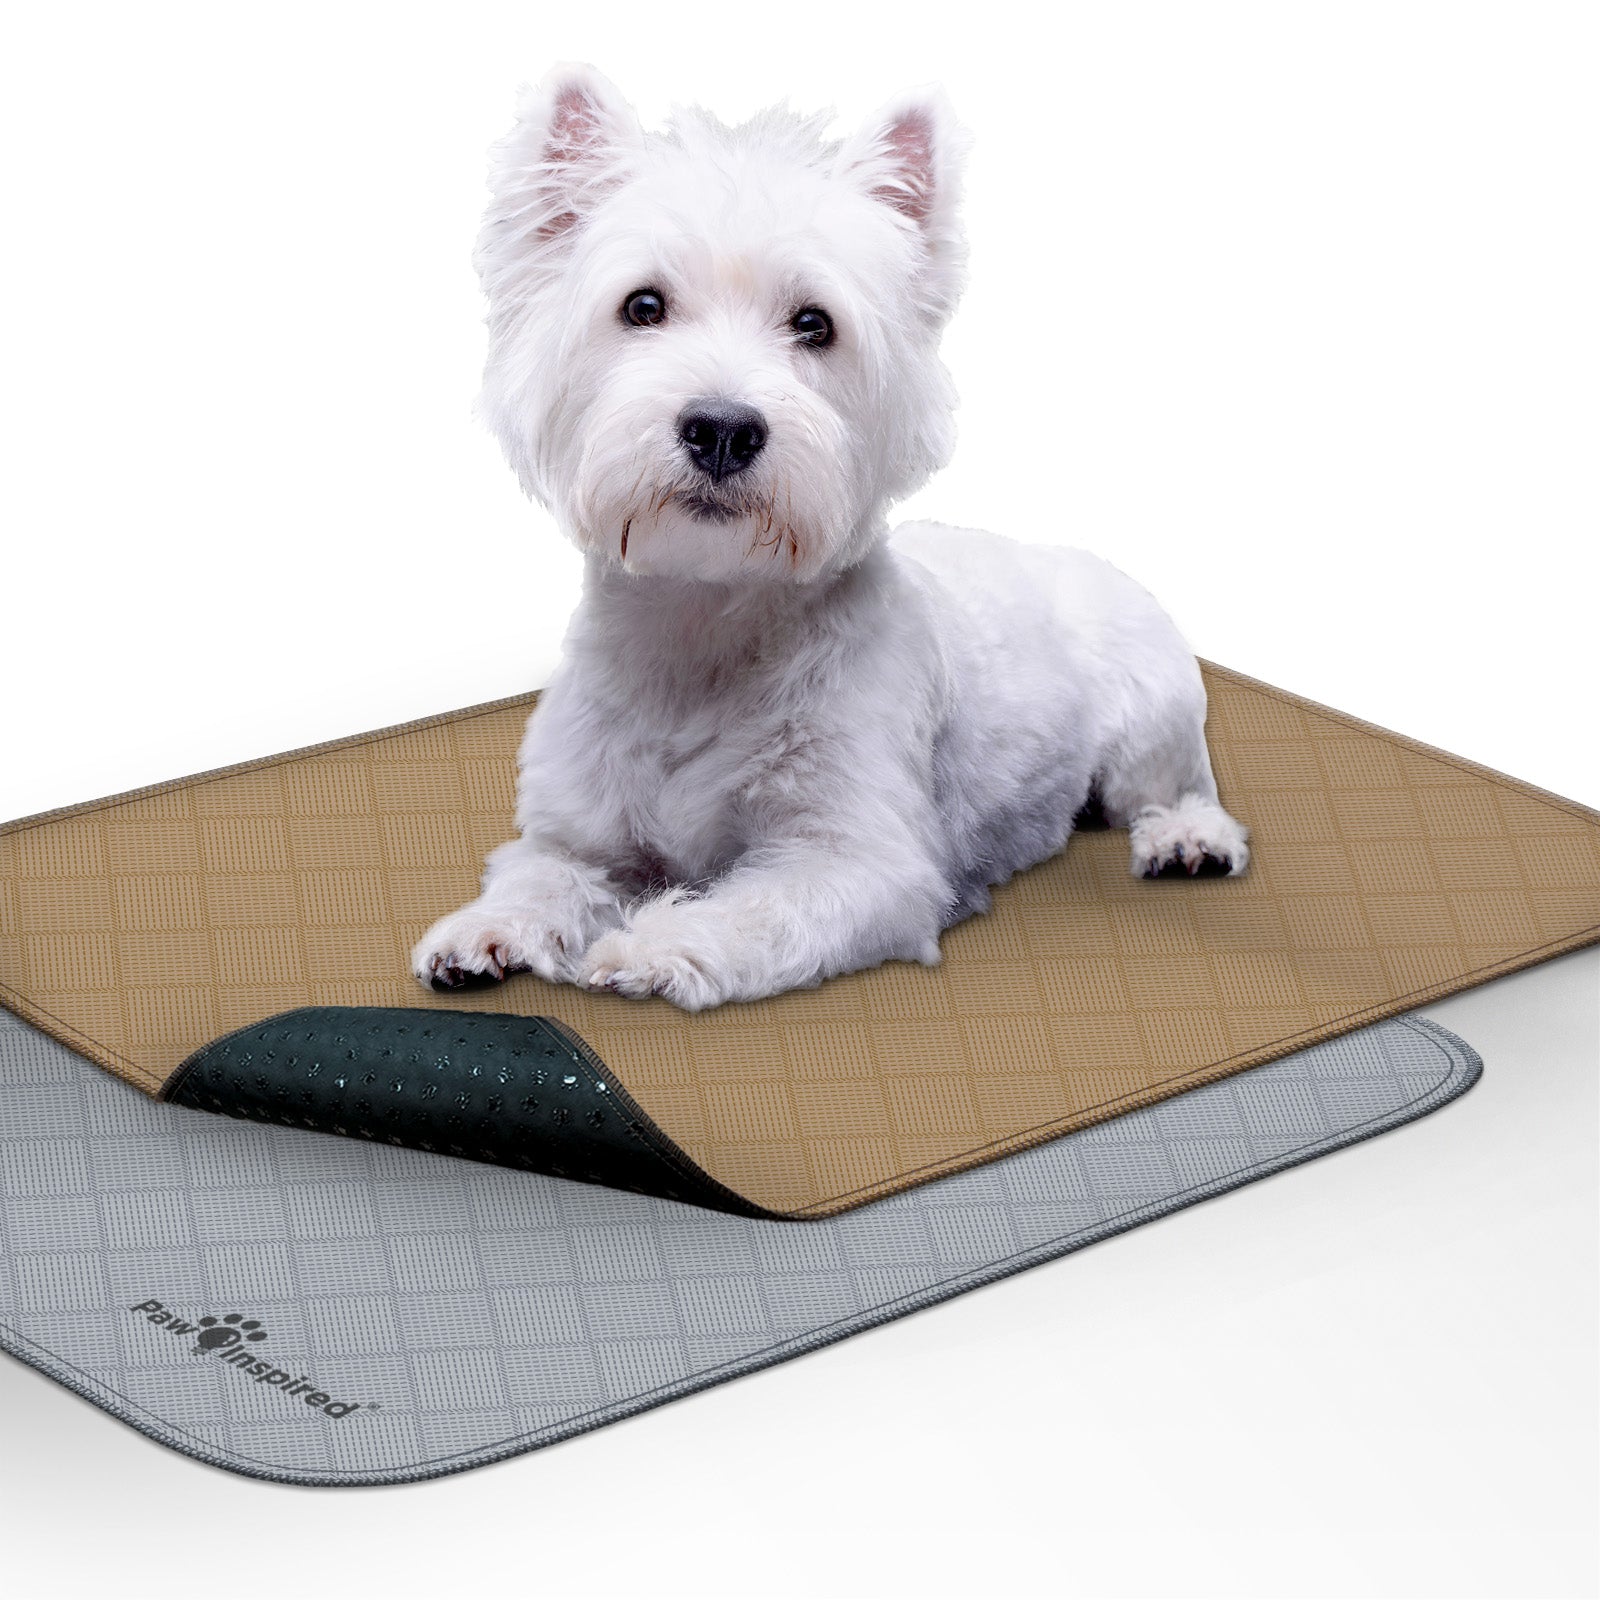 Paw Inspired® Washable Crate Mats